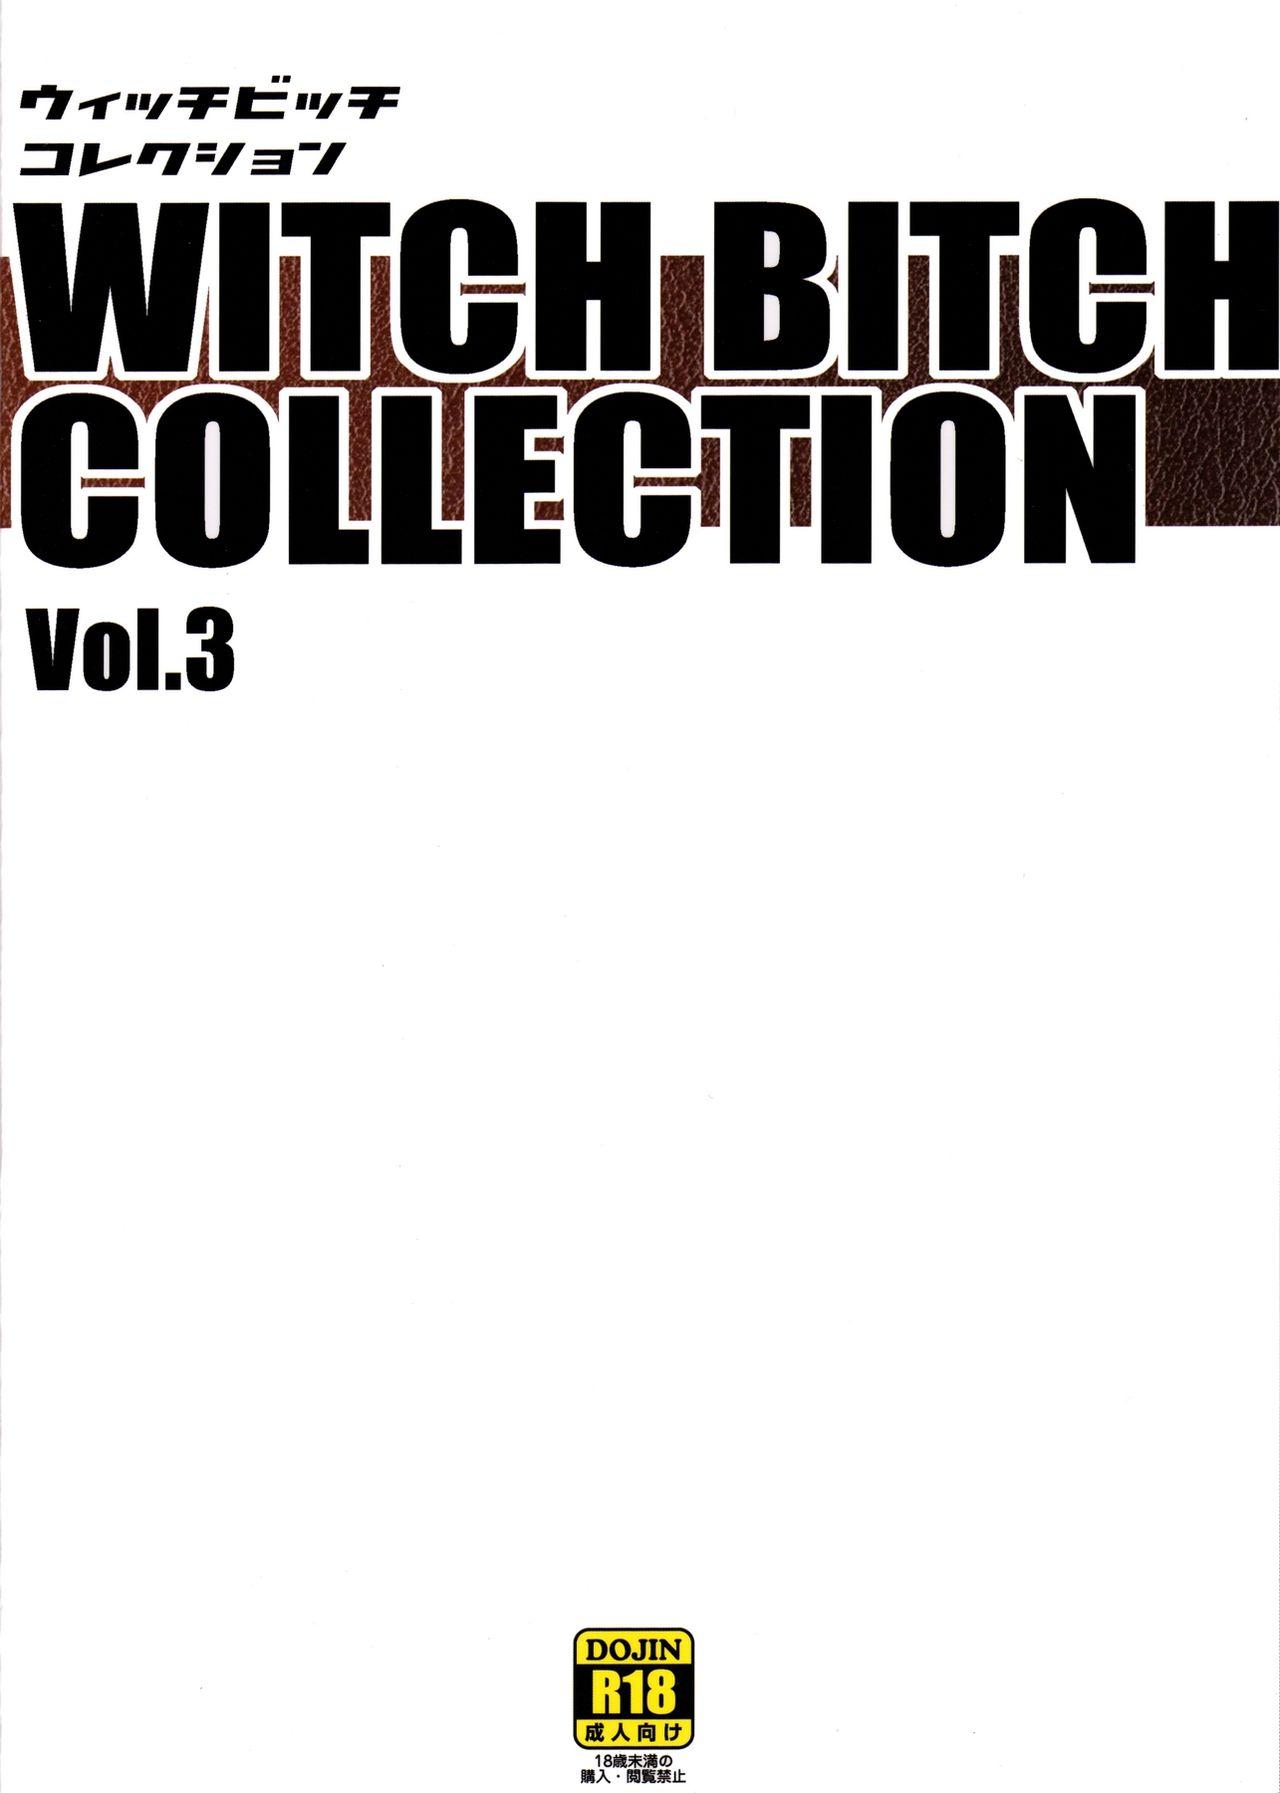 Culona Witch Bitch Collection Vol. 3 - Fairy tail Gordinha - Page 51